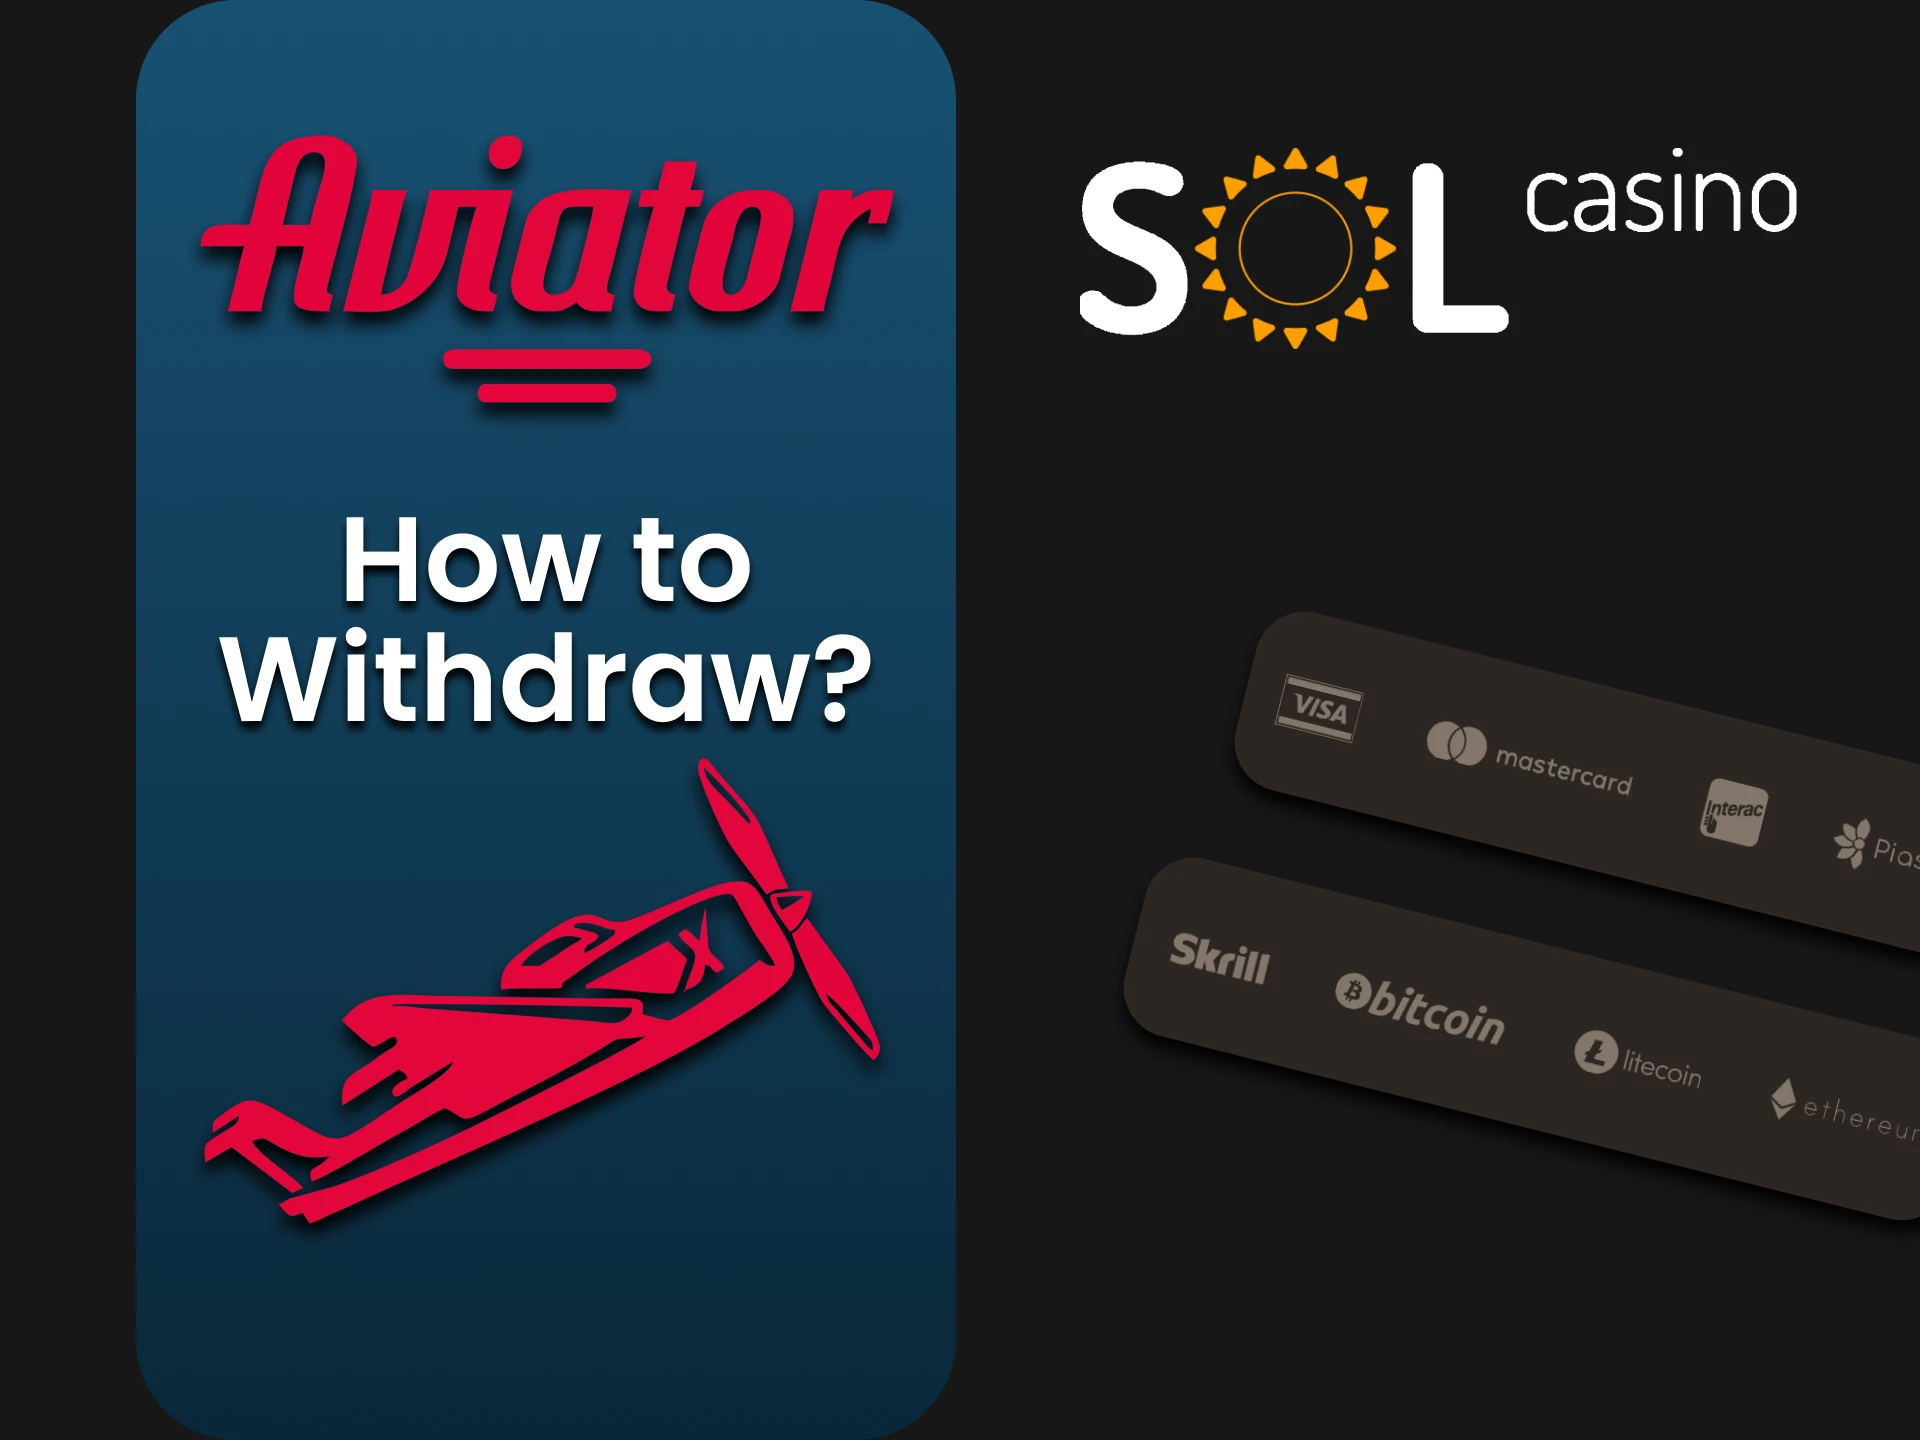 We will tell you about ways to withdraw funds to Sol Casino for Aviator.